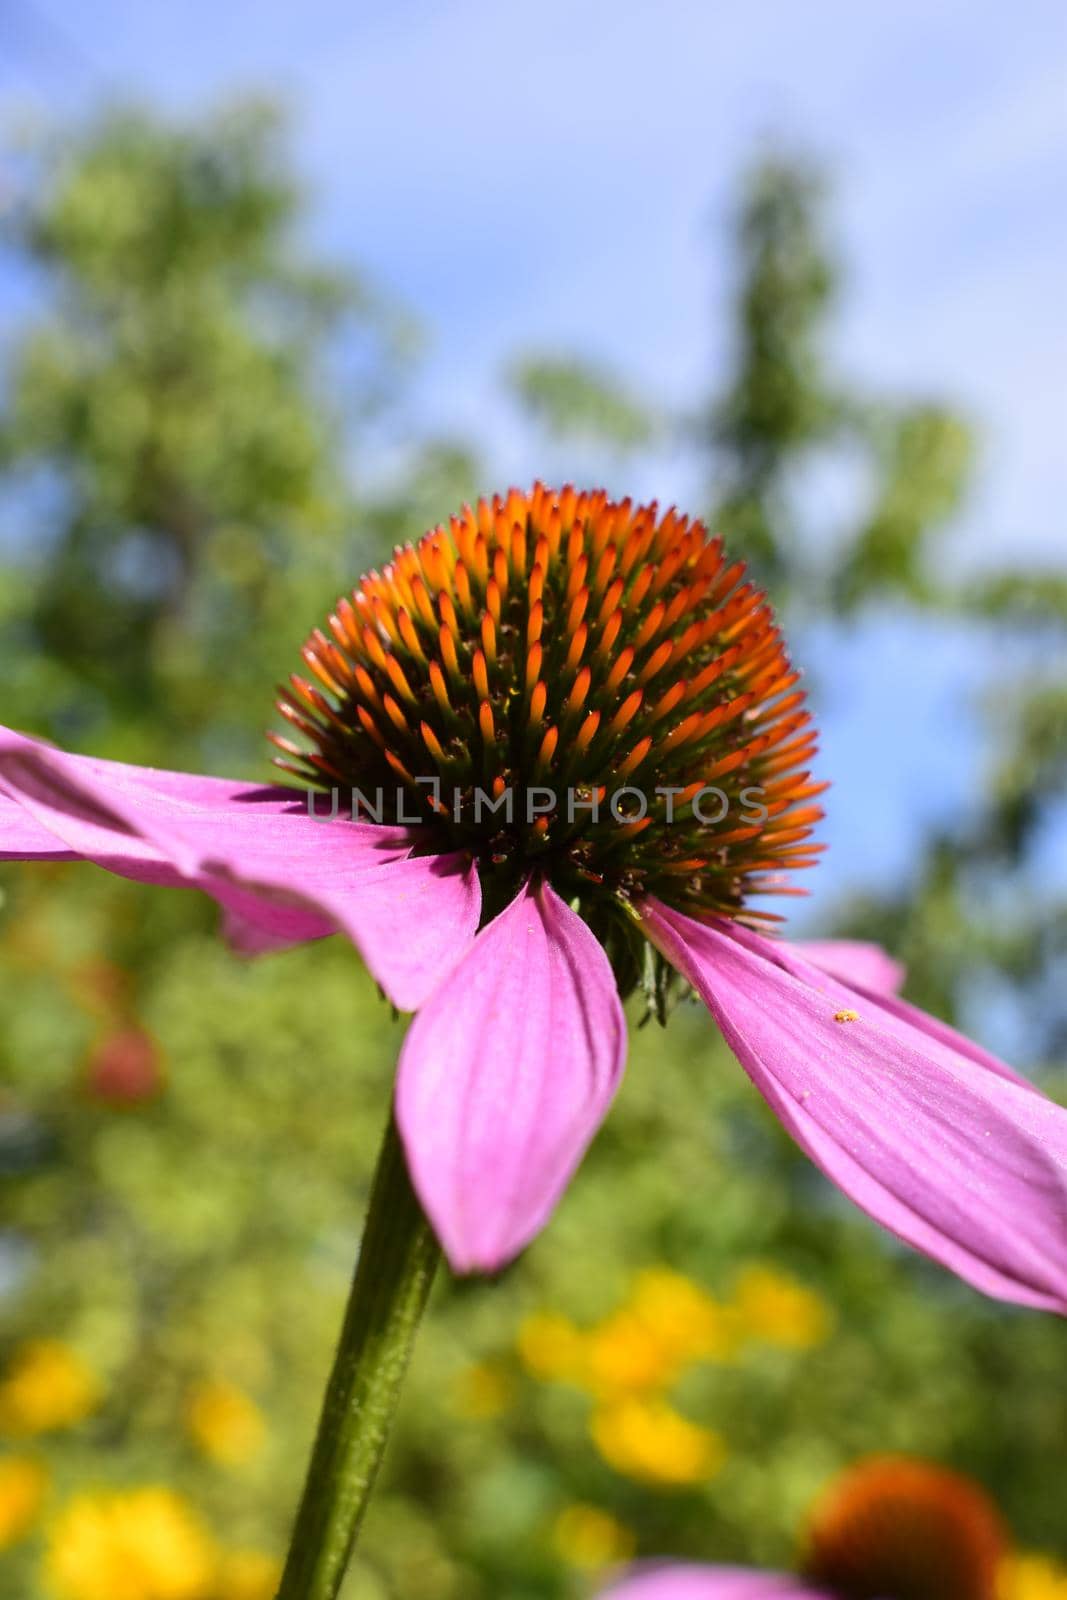 Purple flower Echinacea purpurea in the garden. Botanical background. Beautiful pink petals blooming plants. Decorative shrub for landscape design in parks and gardens